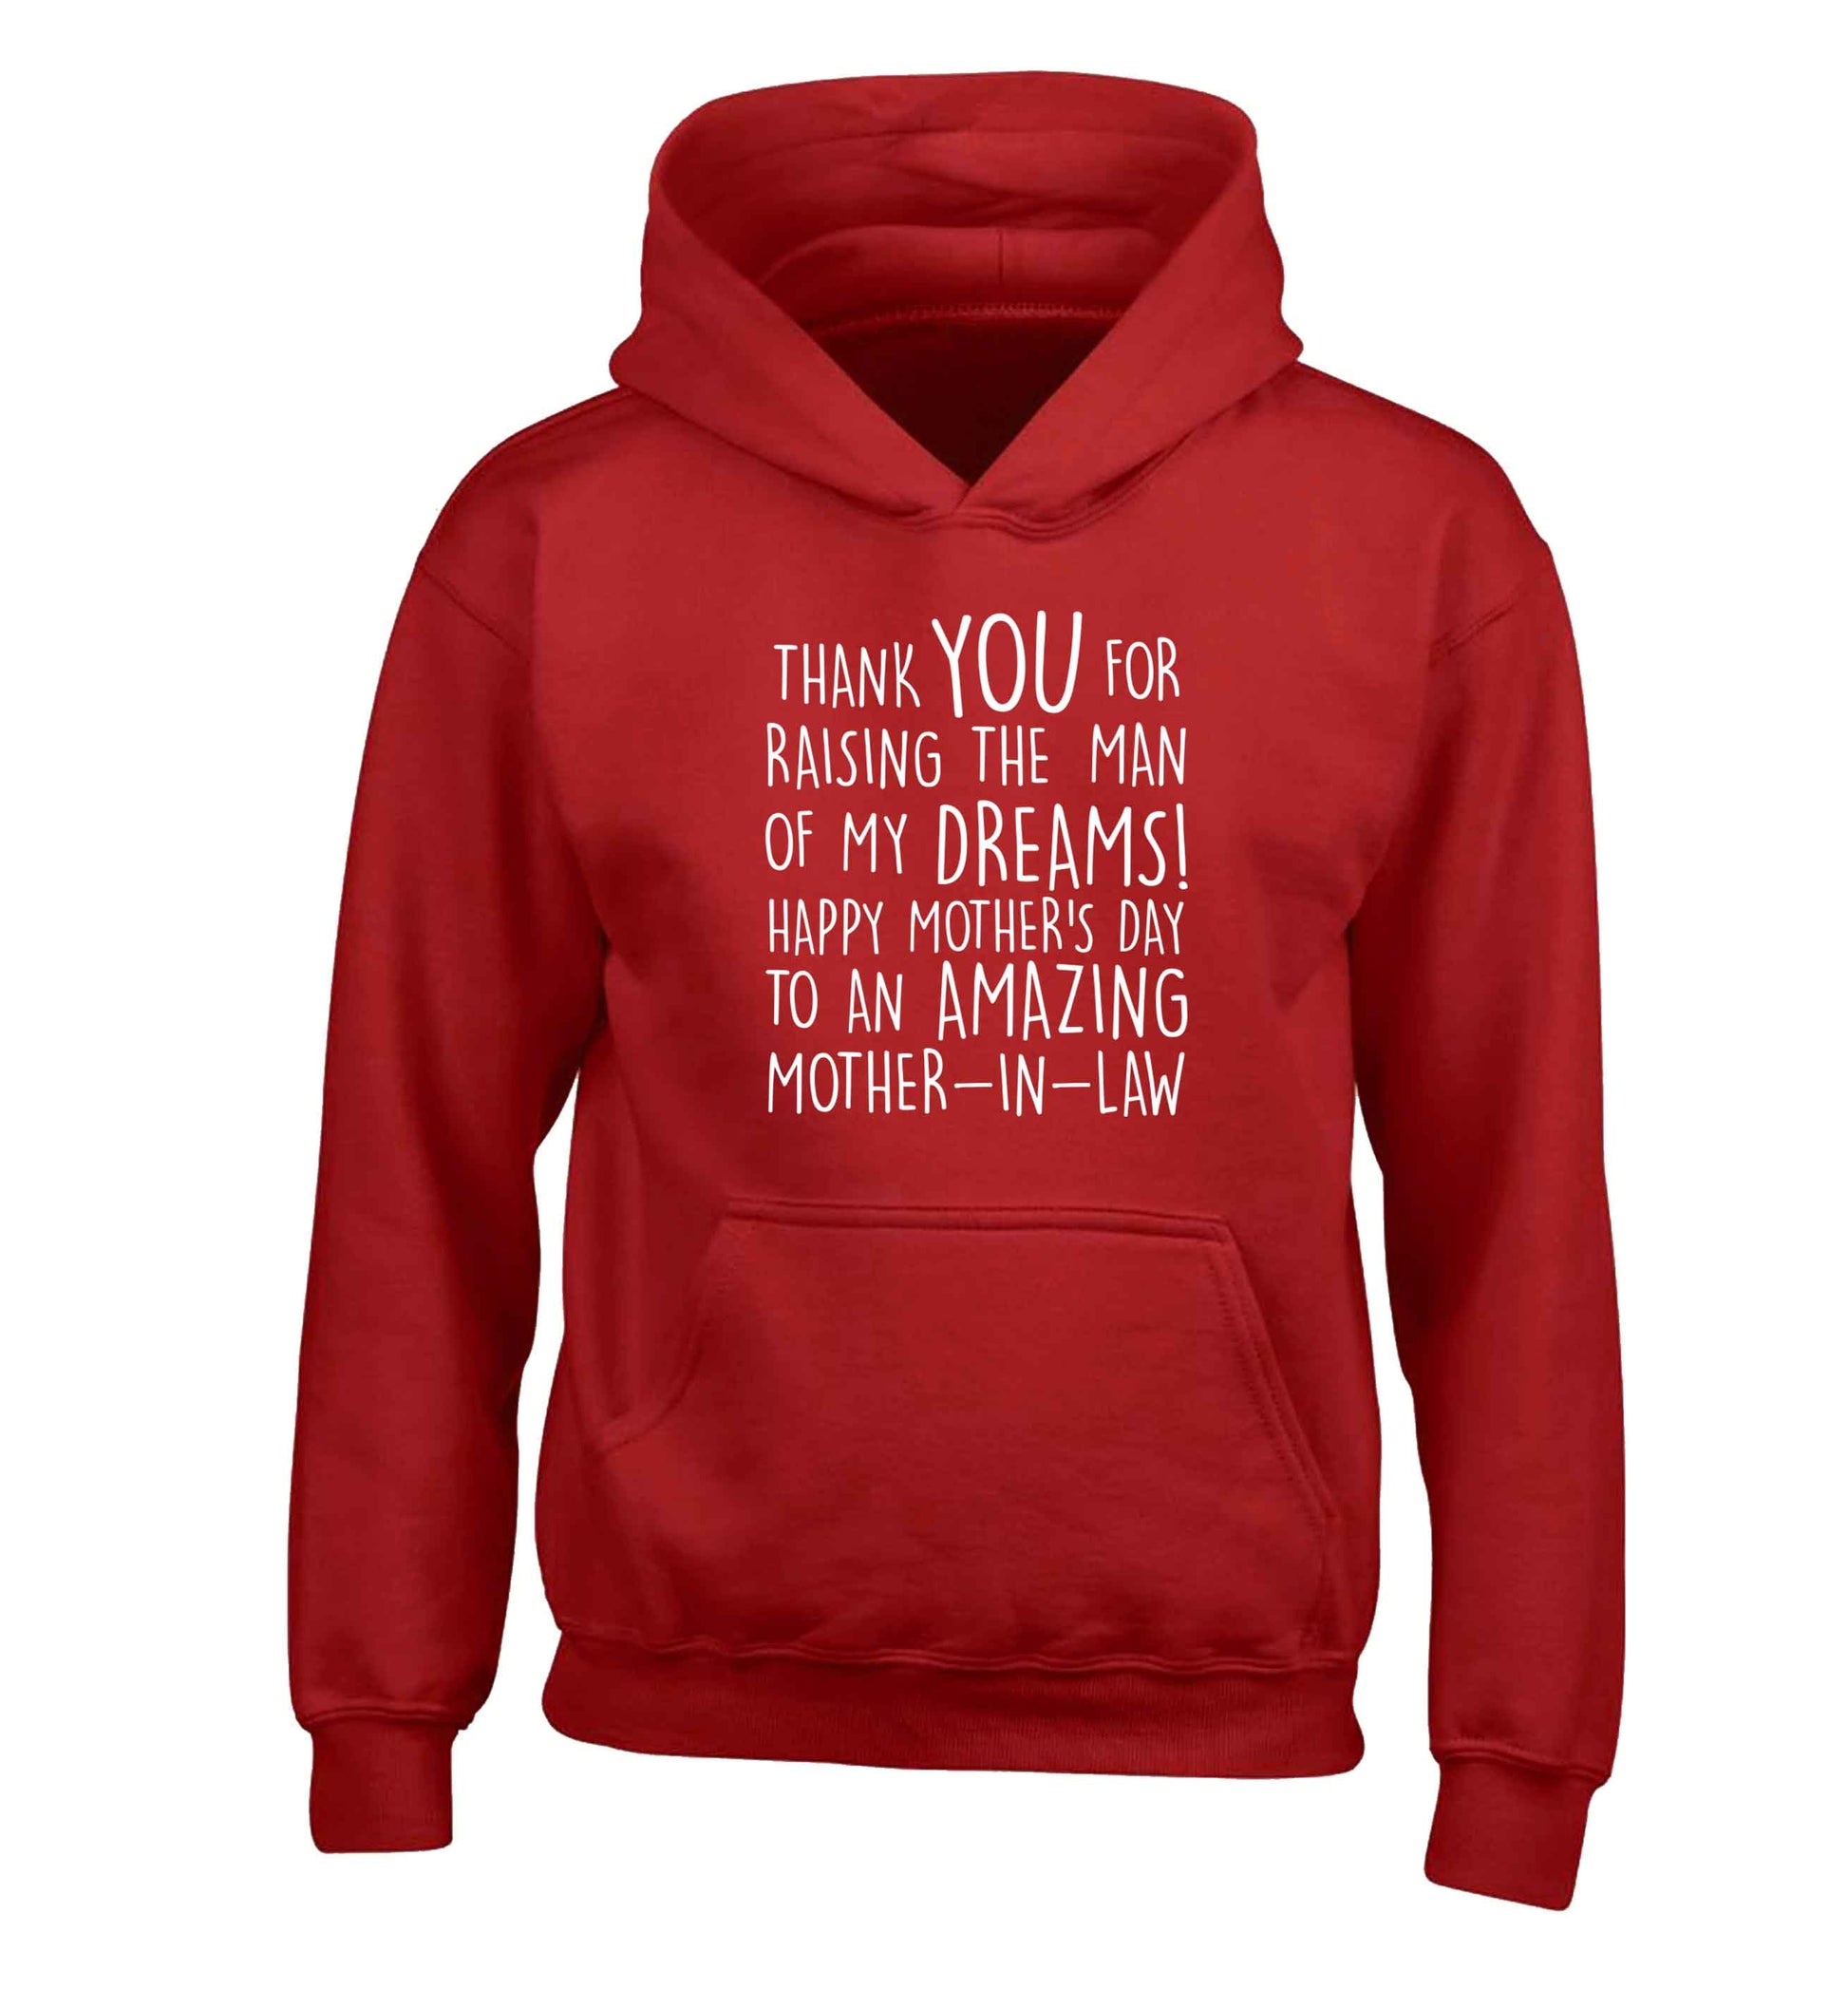 Raising the man of my dreams mother's day mother-in-law children's red hoodie 12-13 Years